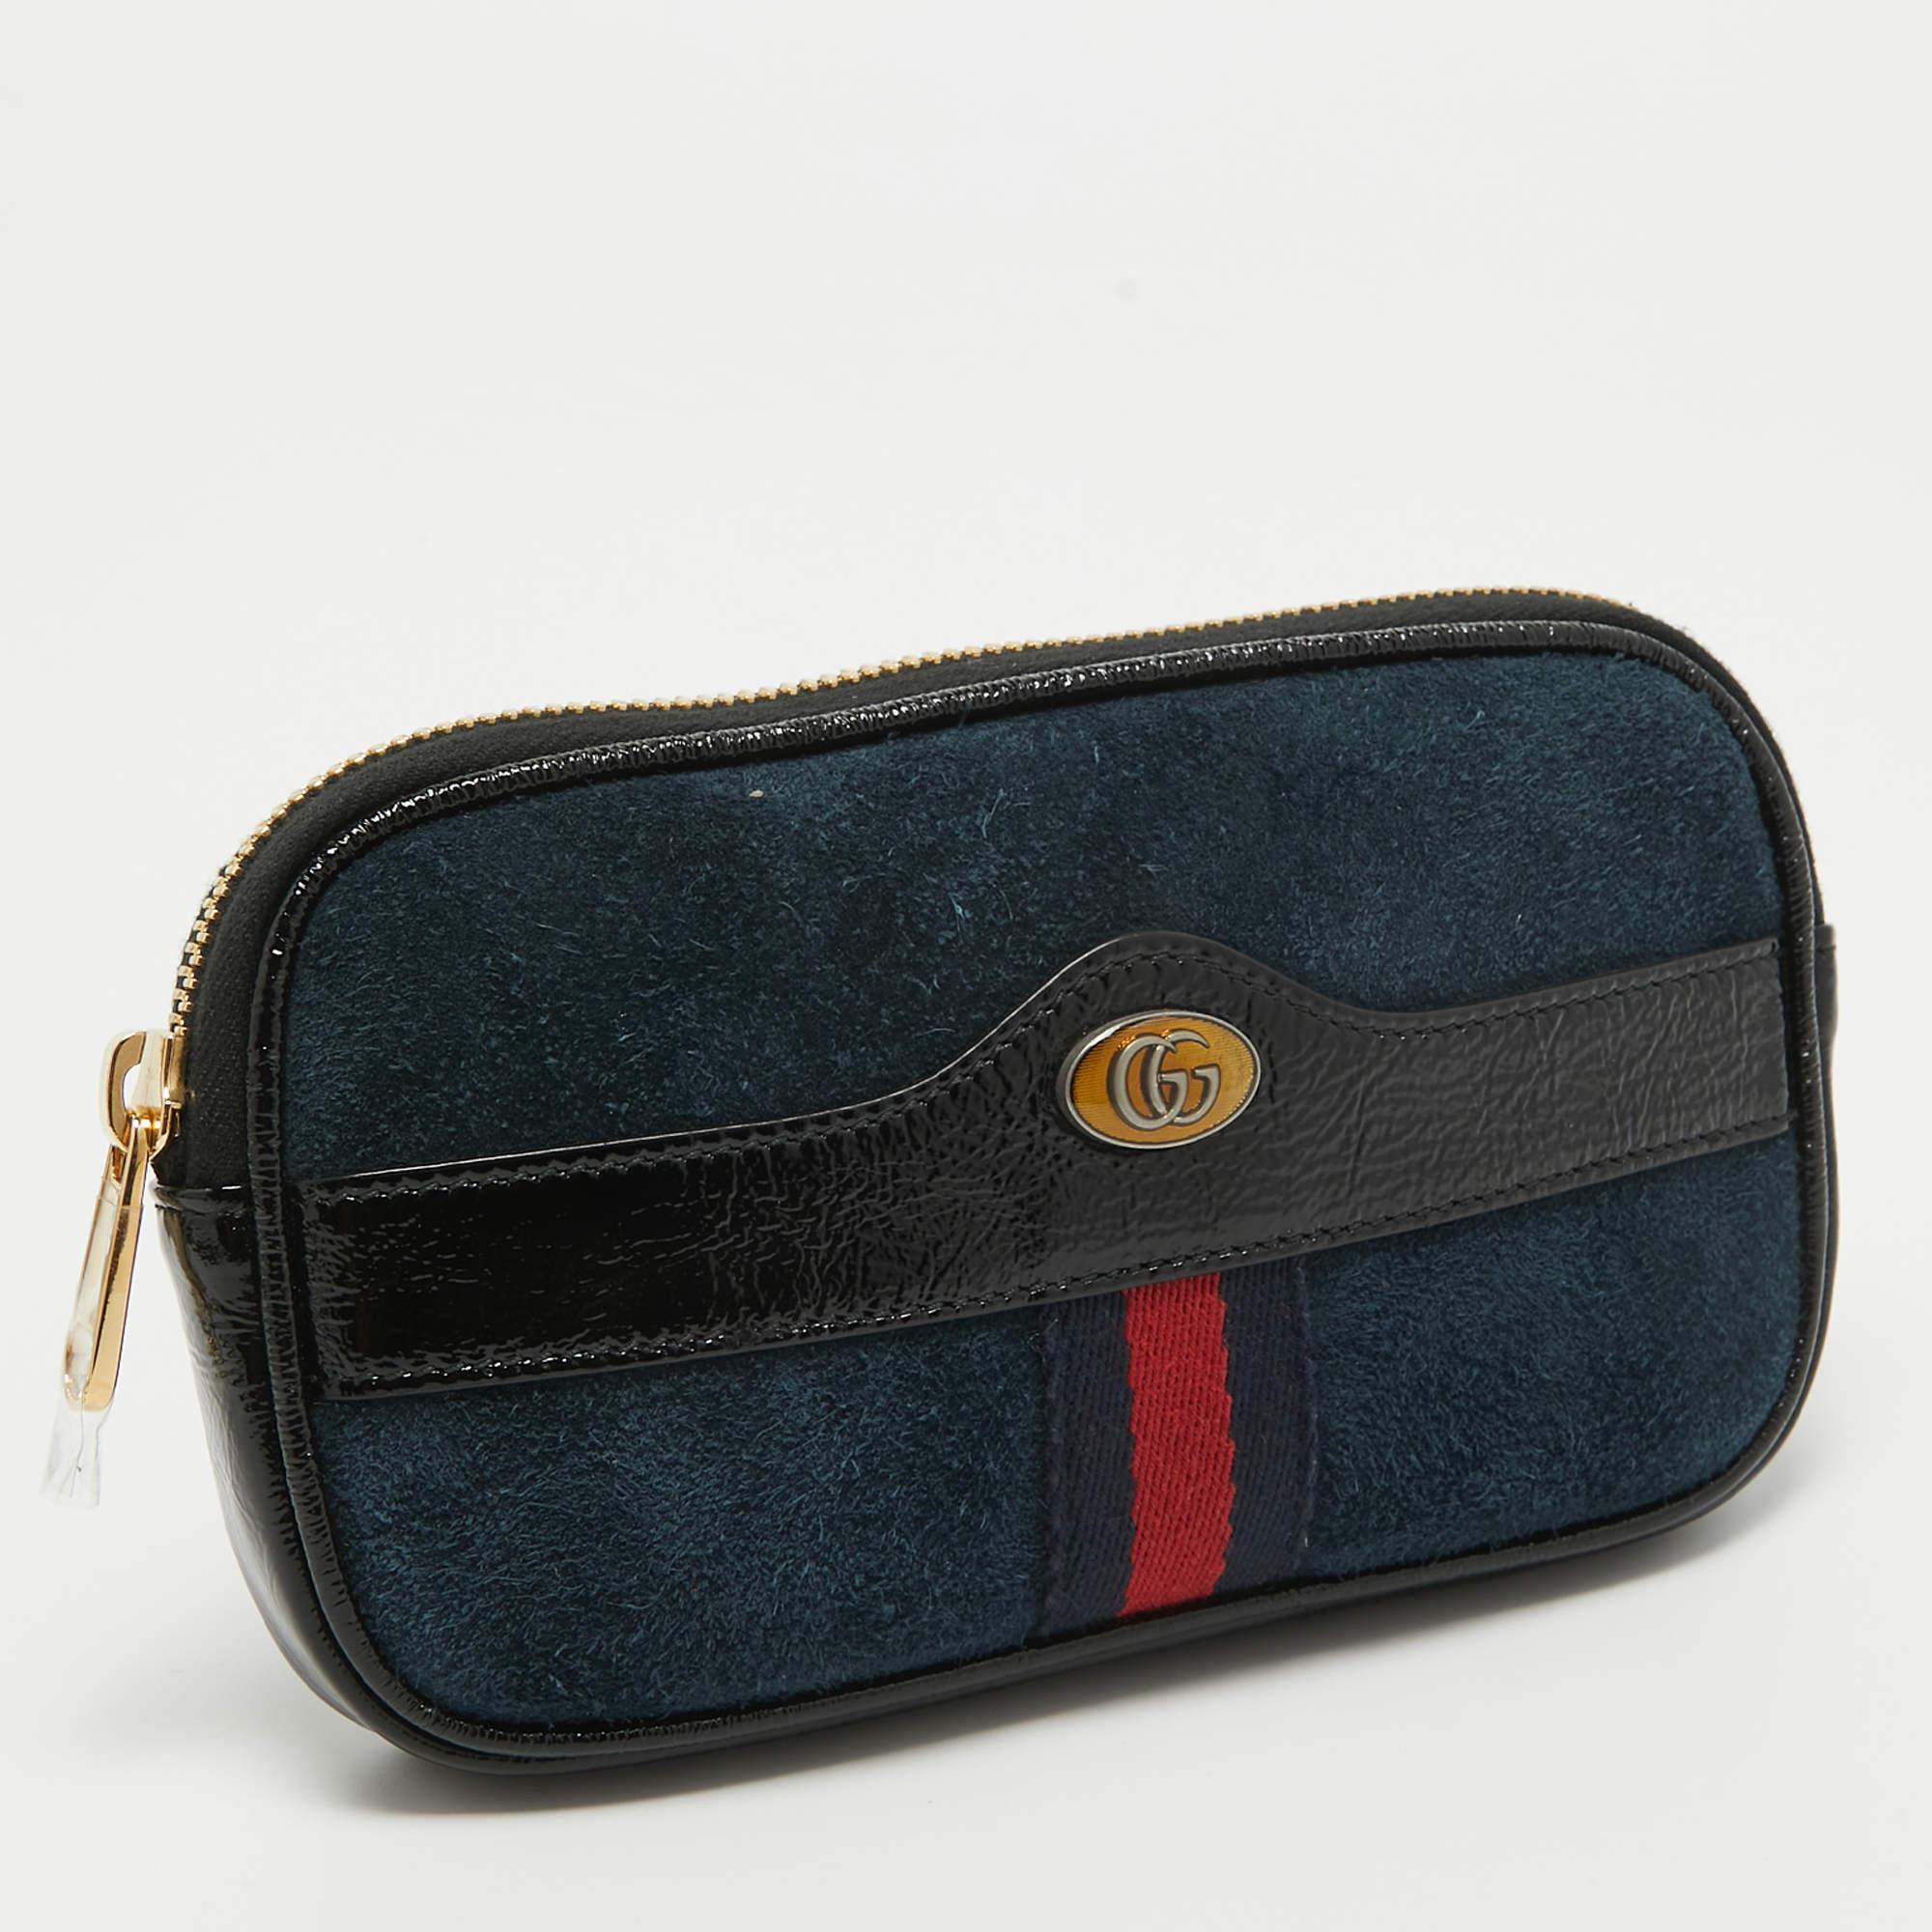 Gucci Black/Navy Blue Suede and Patent Leather Ophidia Belt Bag 8